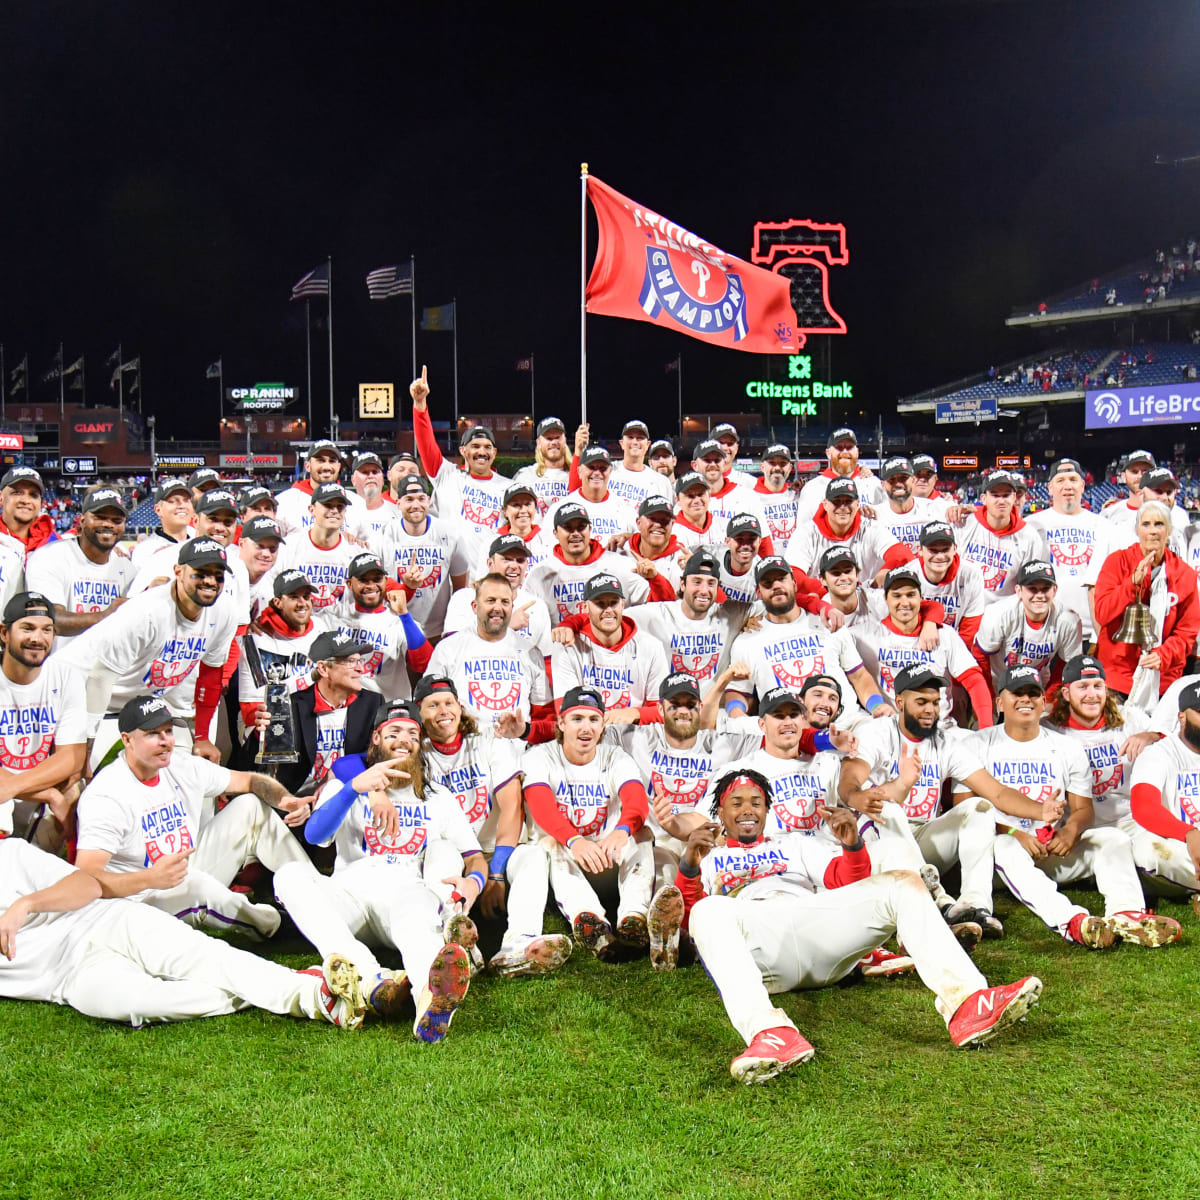 50 Greatest Phillies Games: 2. The first title  Phillies Nation - Your  source for Philadelphia Phillies news, opinion, history, rumors, events,  and other fun stuff.